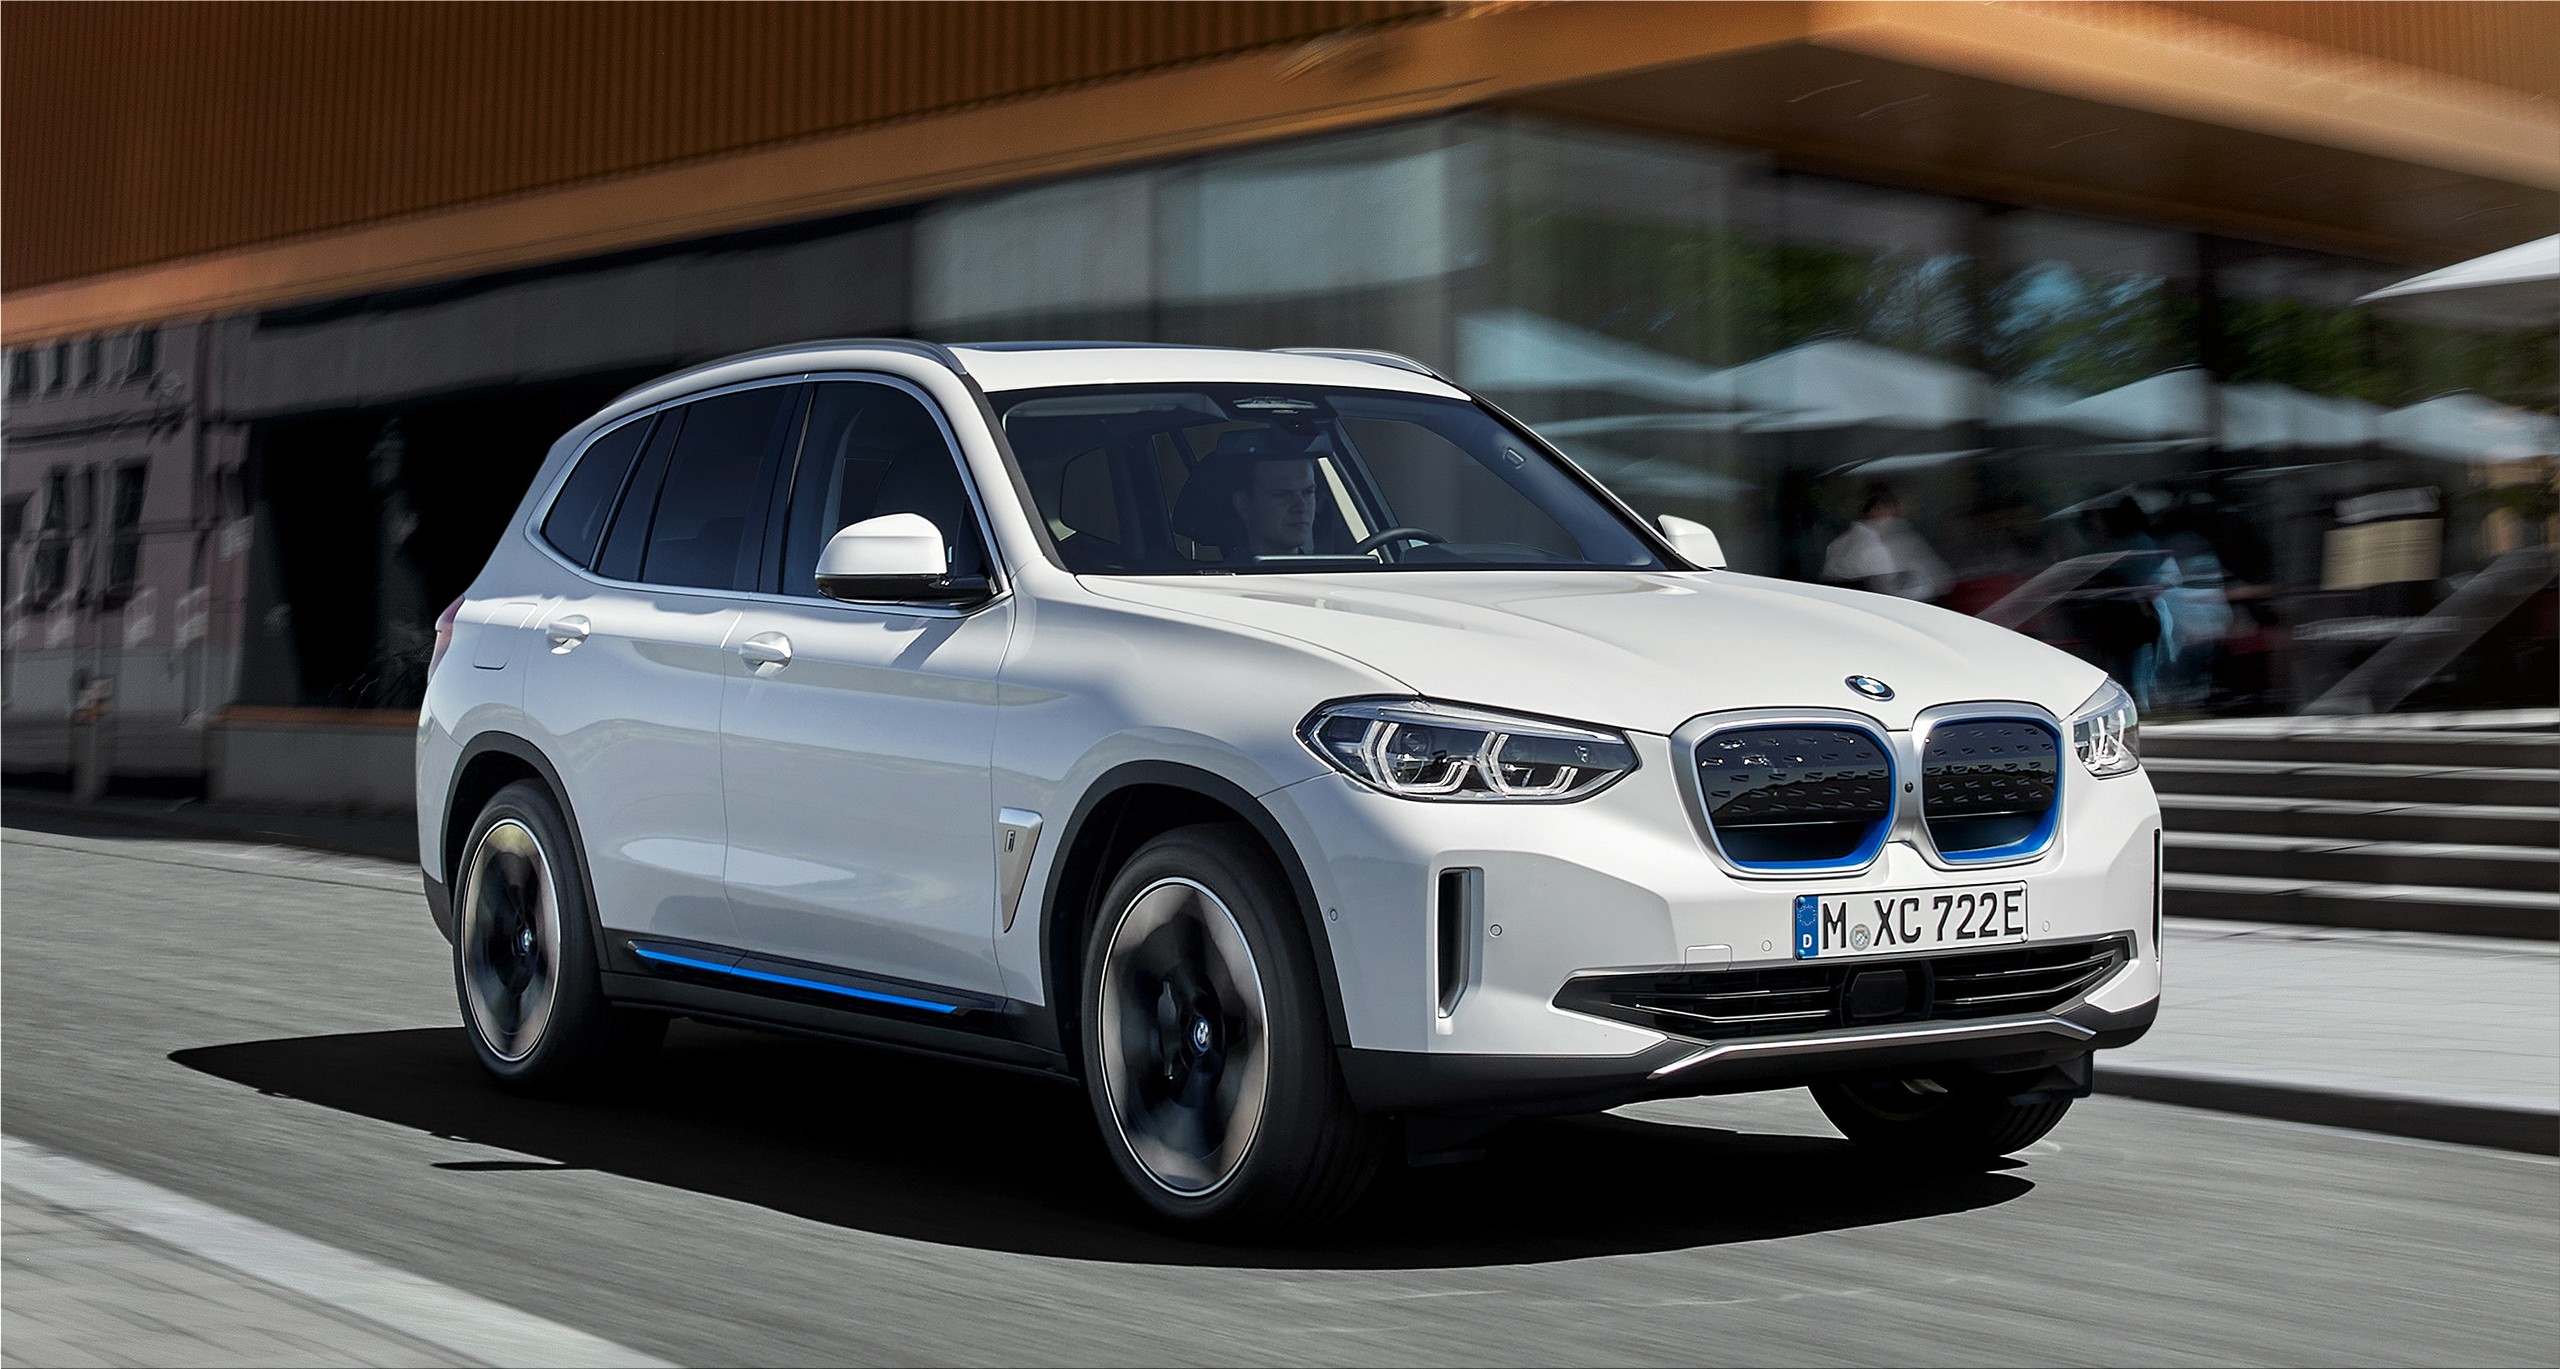 The new BMW iX3 electric SUV - specs and pictures | Electric Hunter